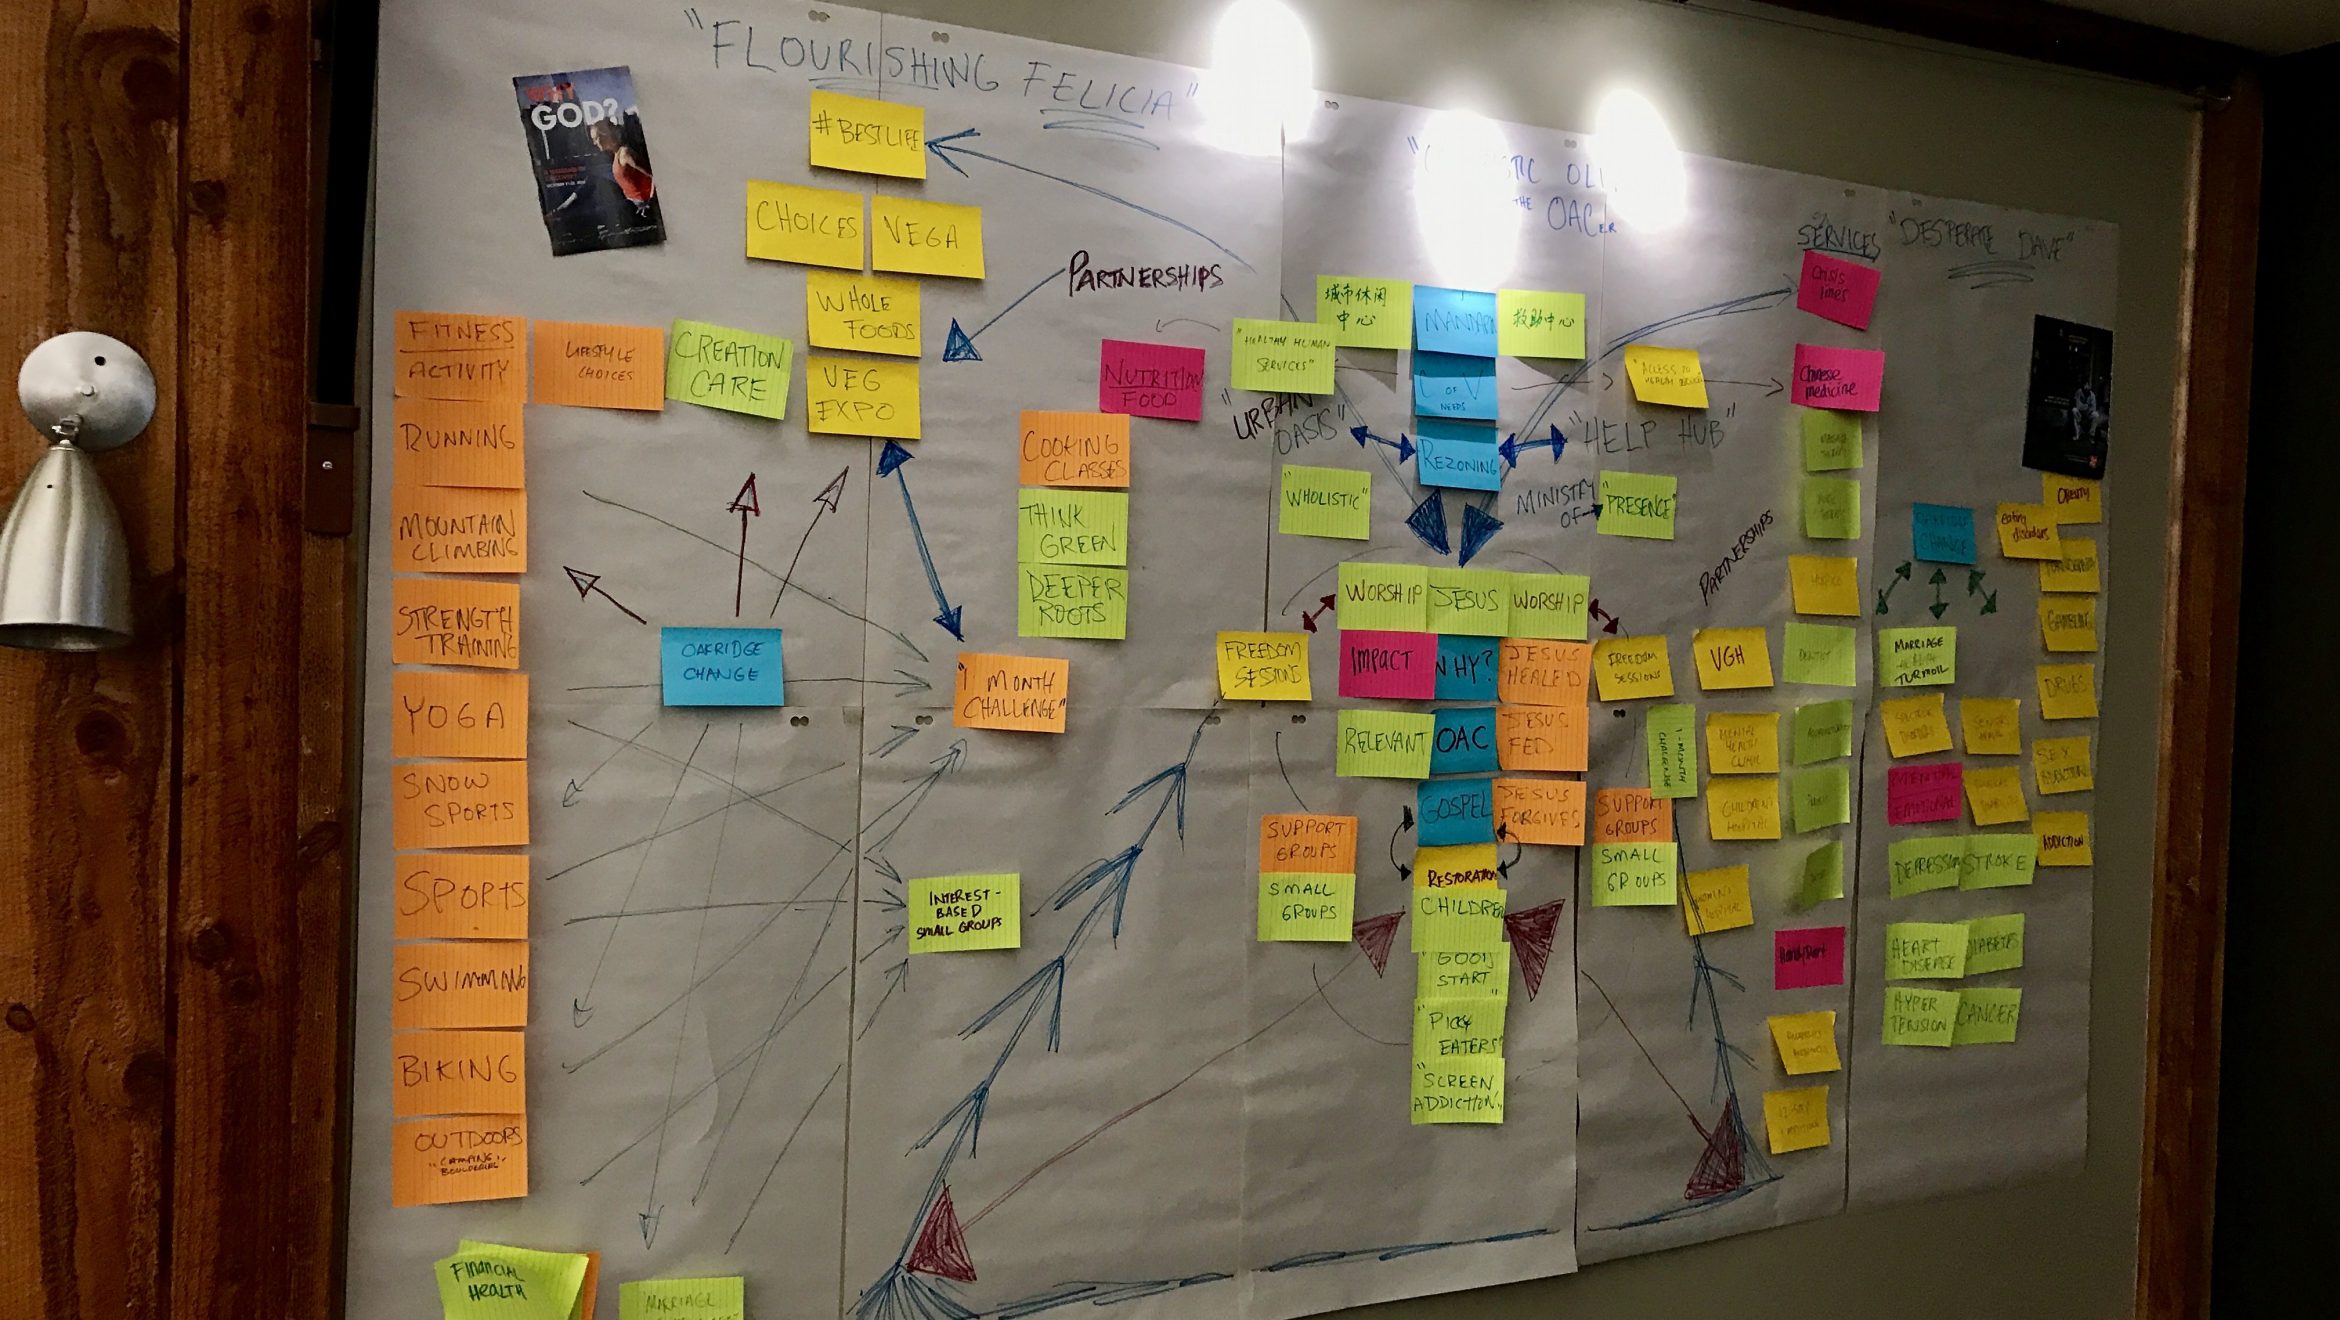 Words of Hope: Staff and Leadership Retreat Results